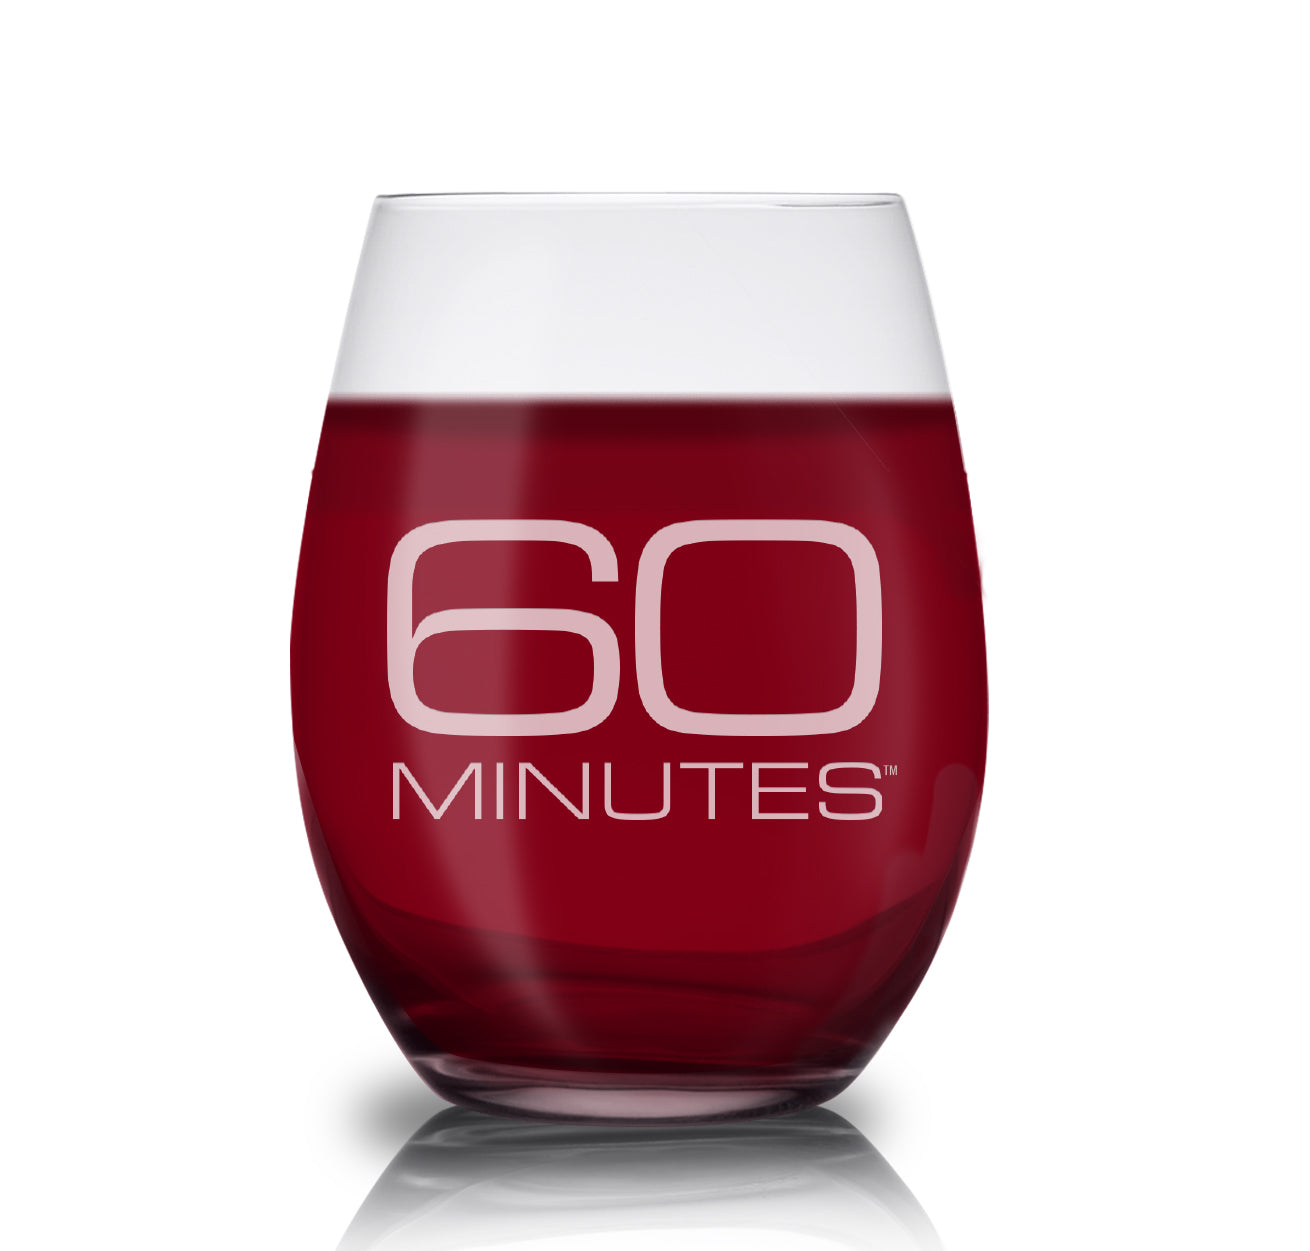 CBS News 60 Minutes Laser Engraved Stemless Wine Glass